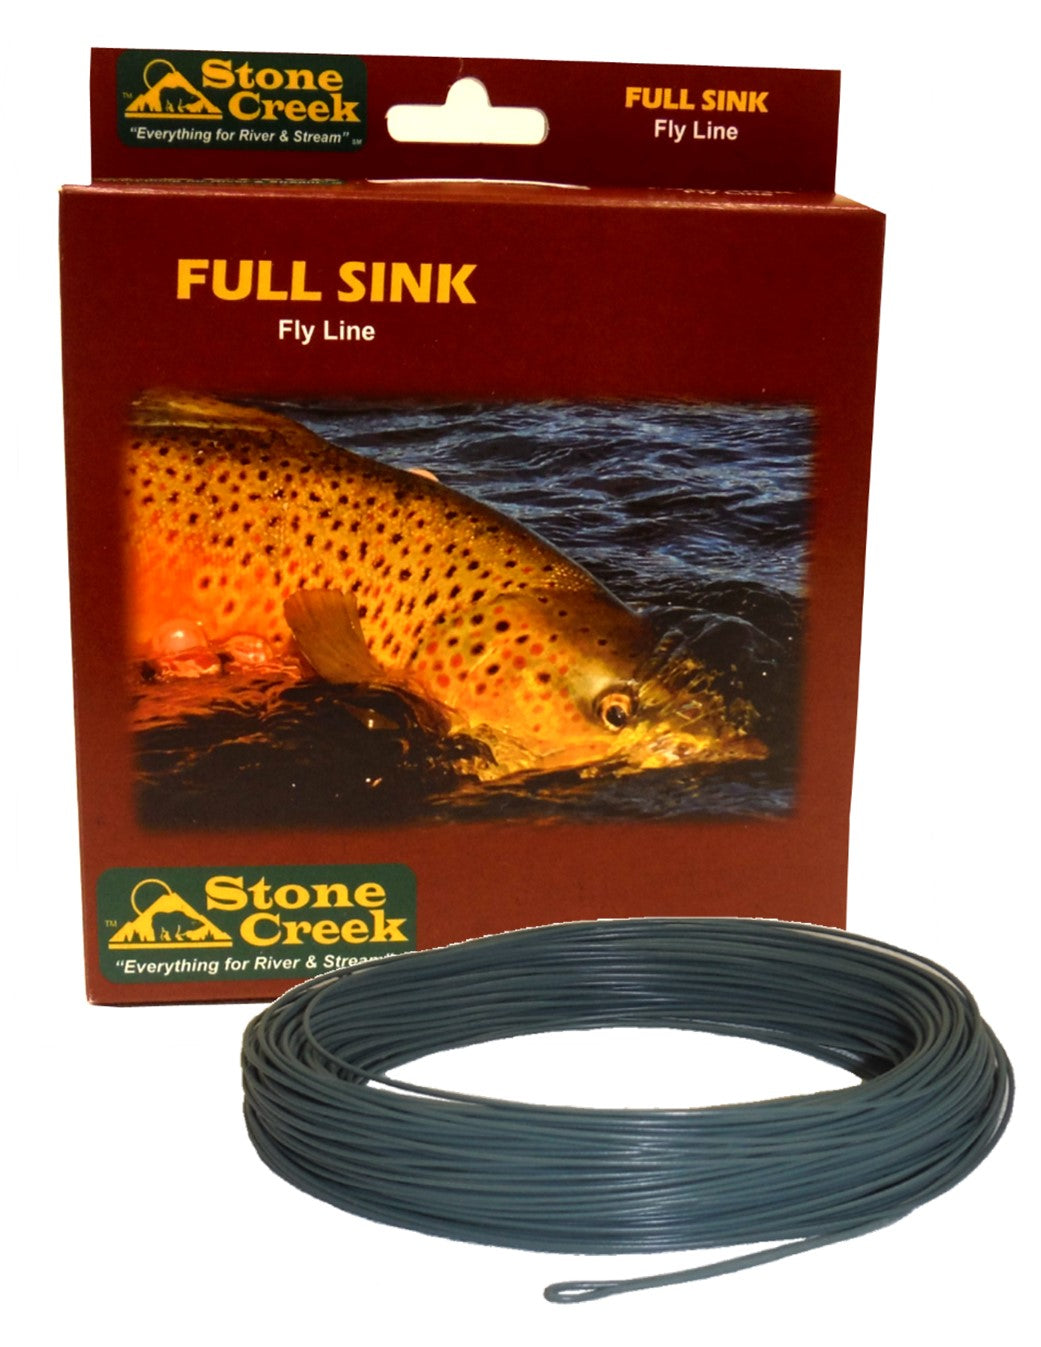 Loon Outdoors Sink Fast Fly Line Cleaner - Sinking Line Treatments